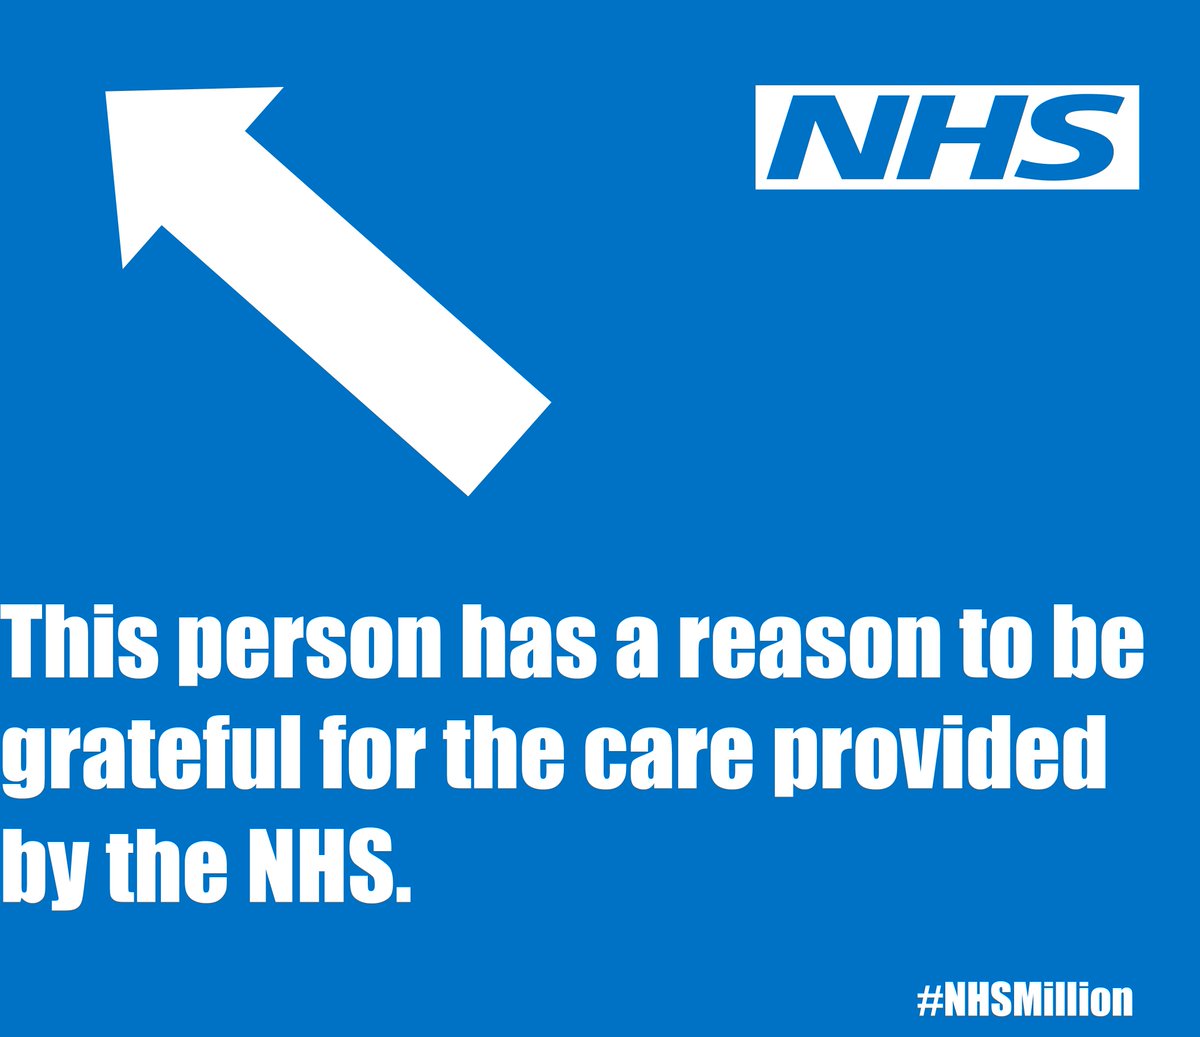 Please RT if you have been grateful for NHS care!